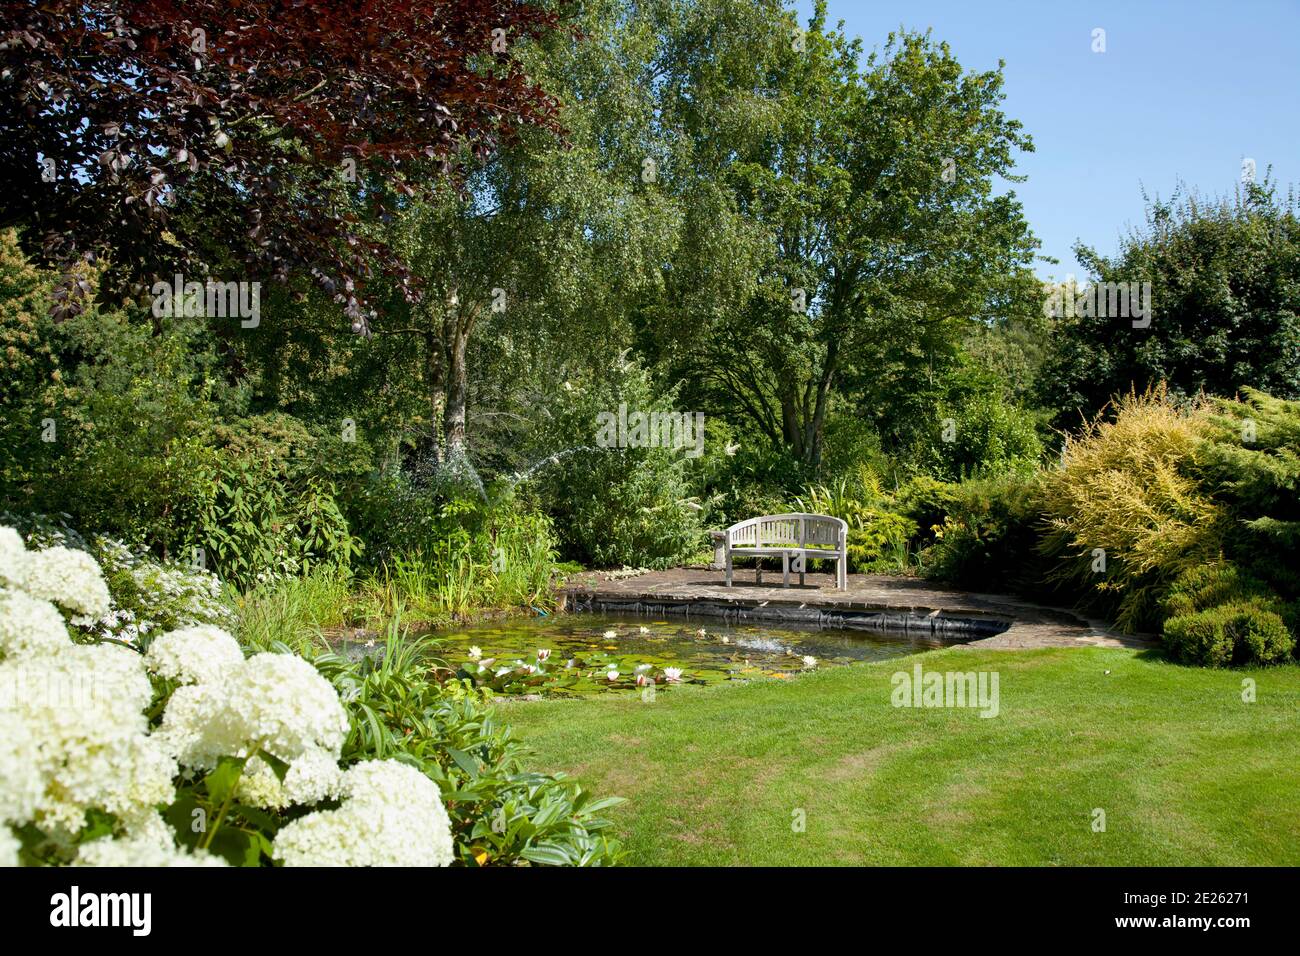 Garden pond with water lilies surrounded by garden, white hydrangea and bench Stock Photo